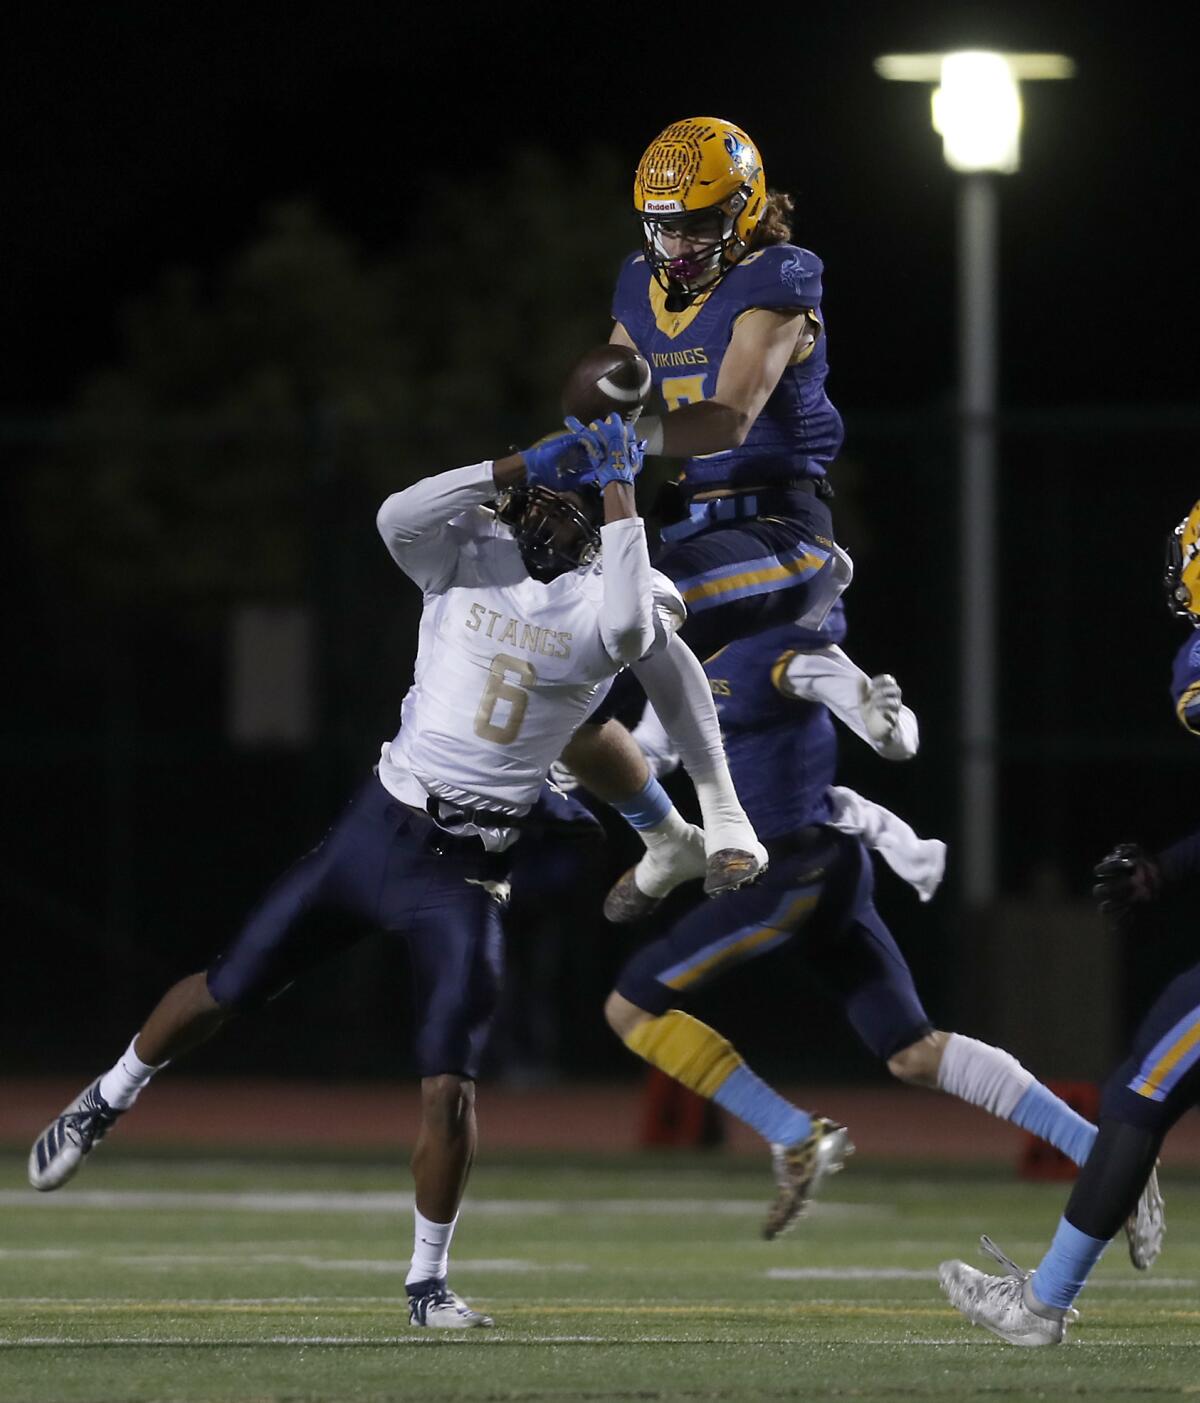 Marina’s Dane Brenton, top, breaks up a pass intended for Muir’s John Humphrey, left, and Eric Church, not pictured, intercepts it in the CIF Southern Section Division 11 title game on Nov. 29 at Westminster High.